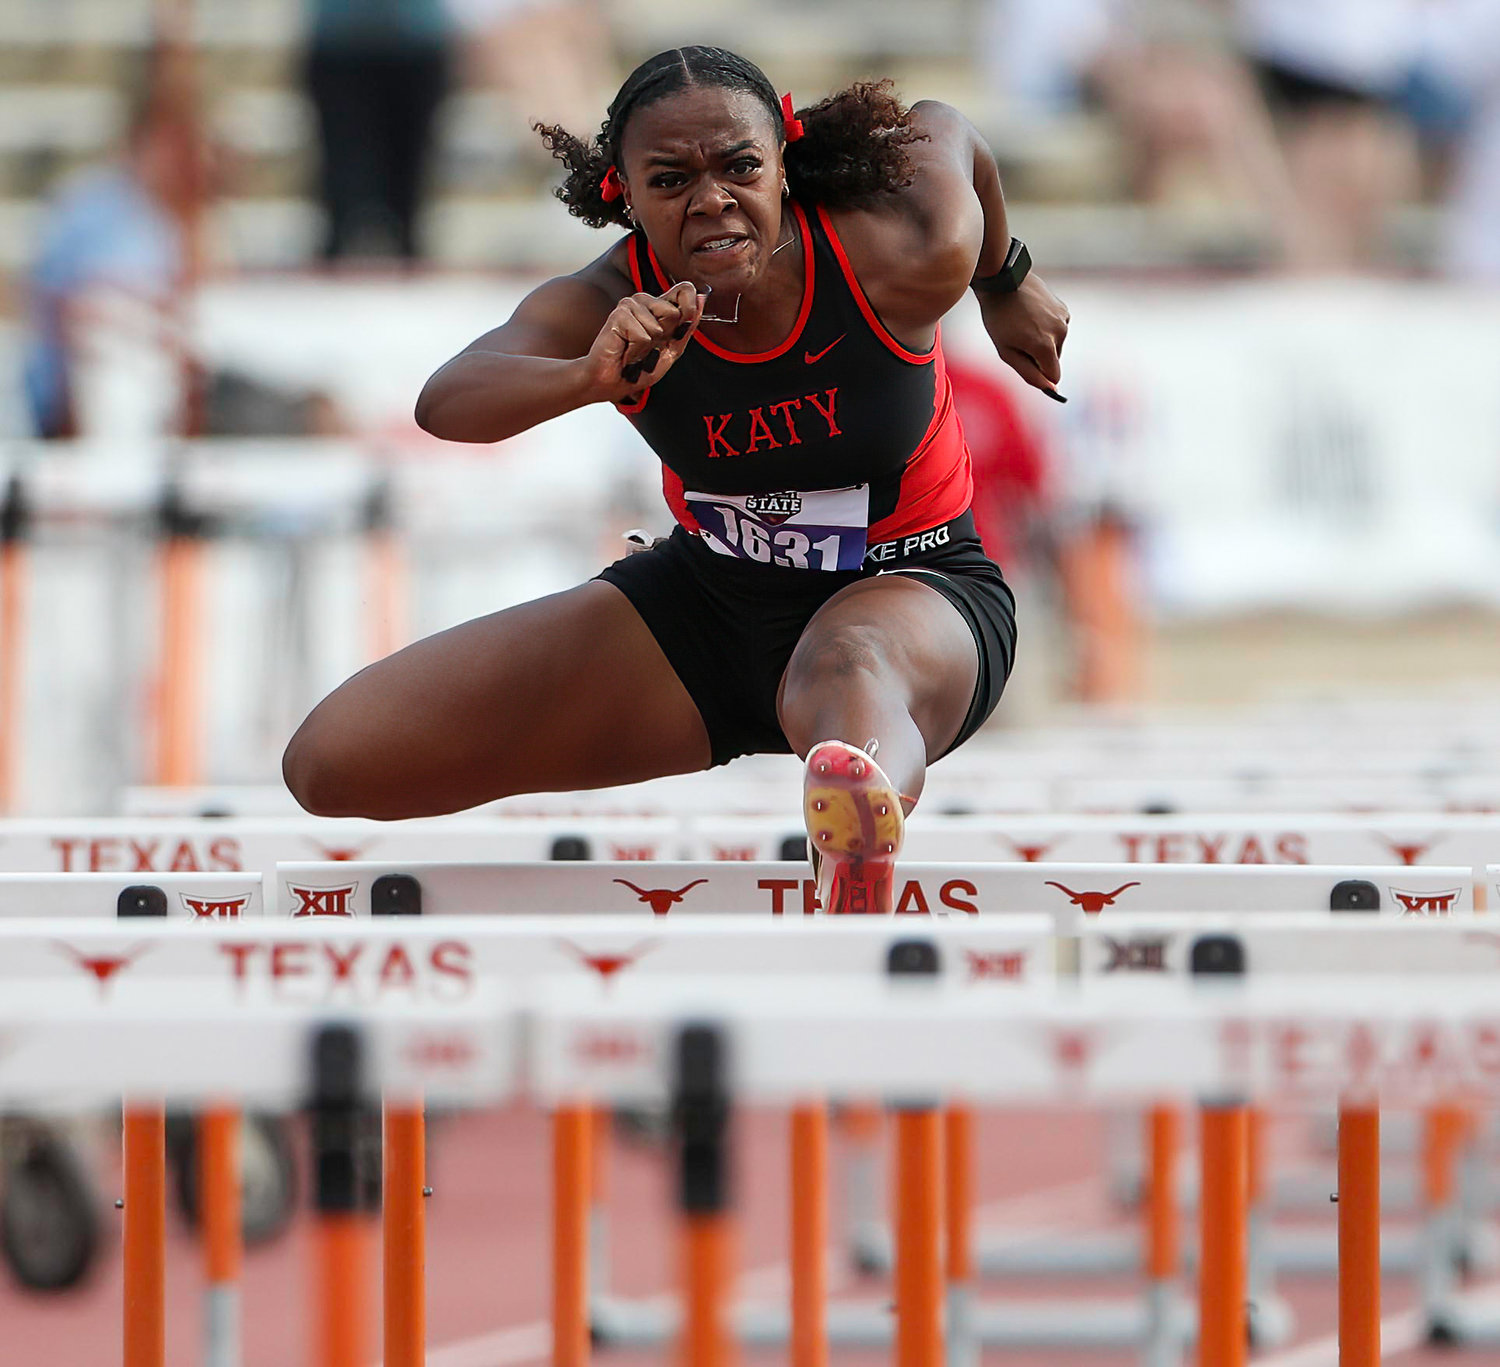 Kaycee McCoy of Katy High School runs in the Class 6A girls 100-meter hurdles at the UIL State Track and Field Meet on May 14, 2022 in Austin, Texas.